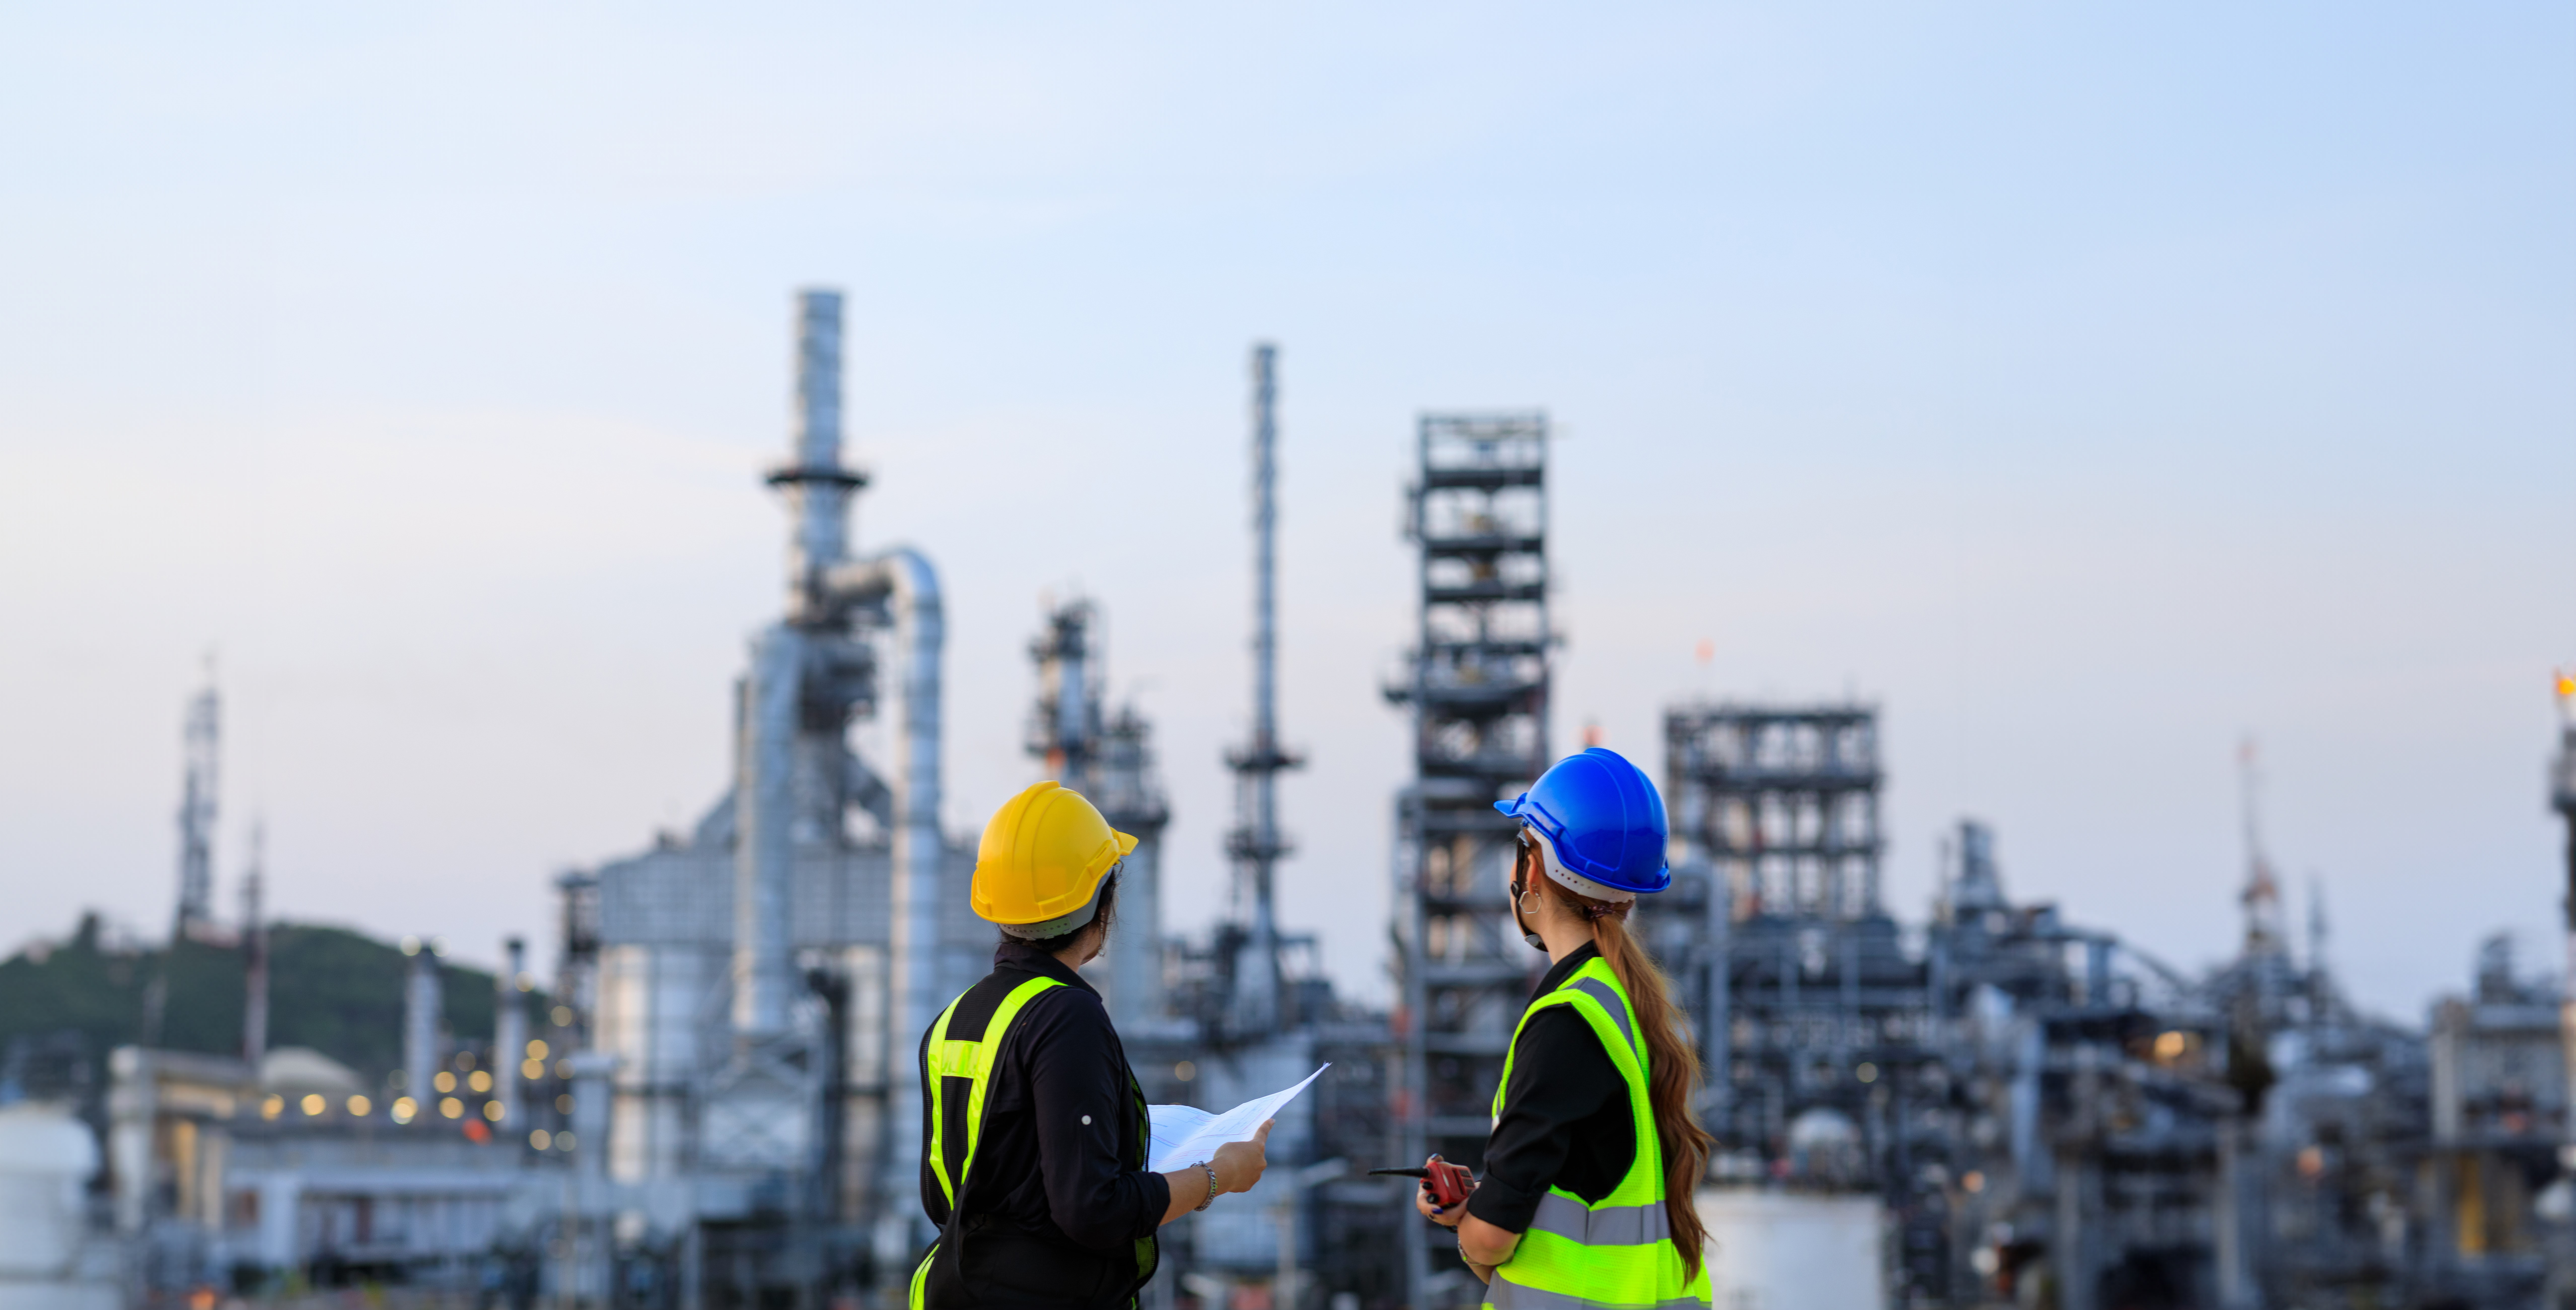 two female engineers at an oil refinery - why you need gas detection